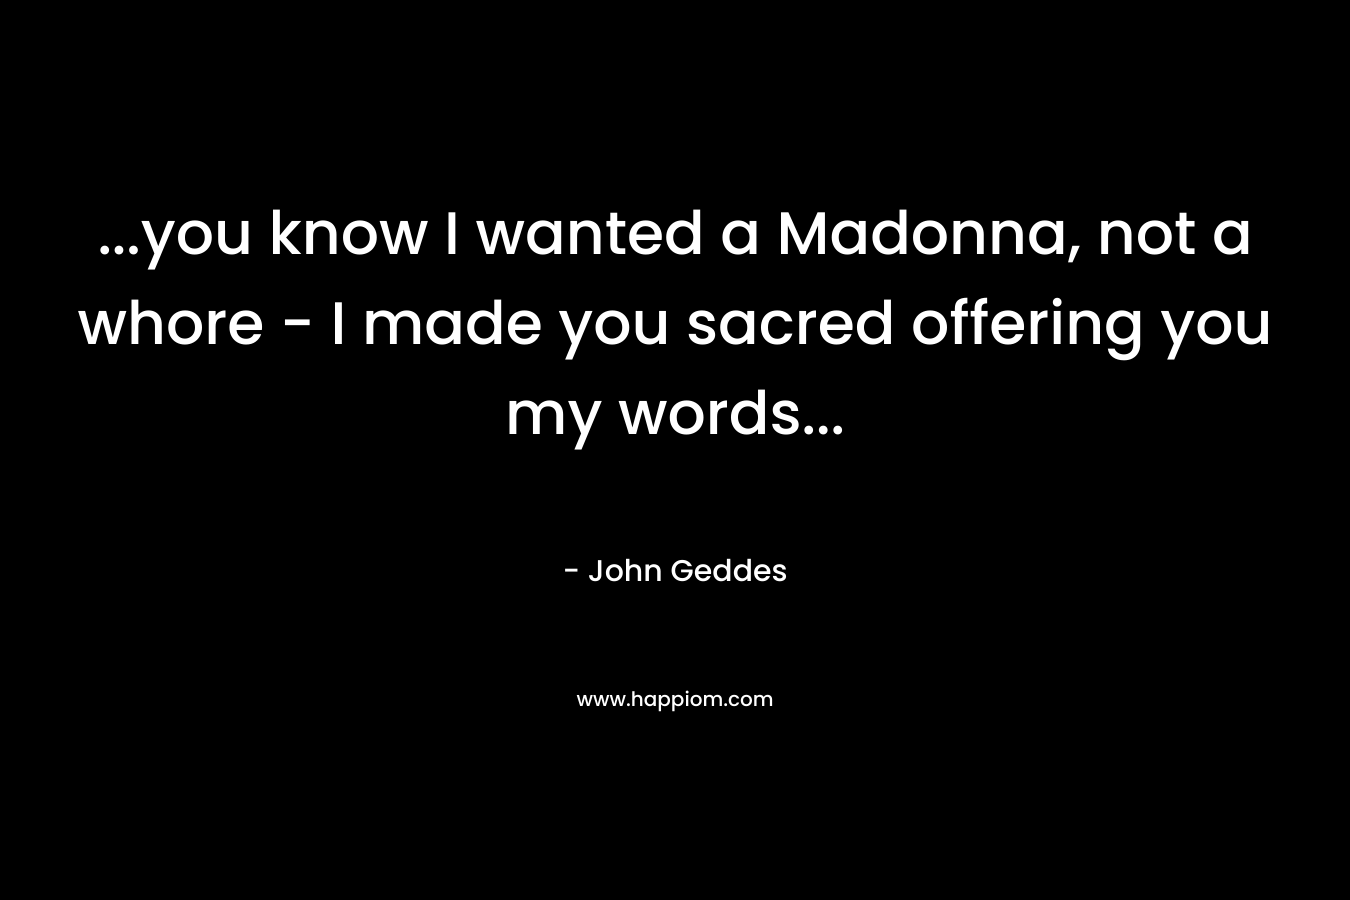 ...you know I wanted a Madonna, not a whore - I made you sacred offering you my words...